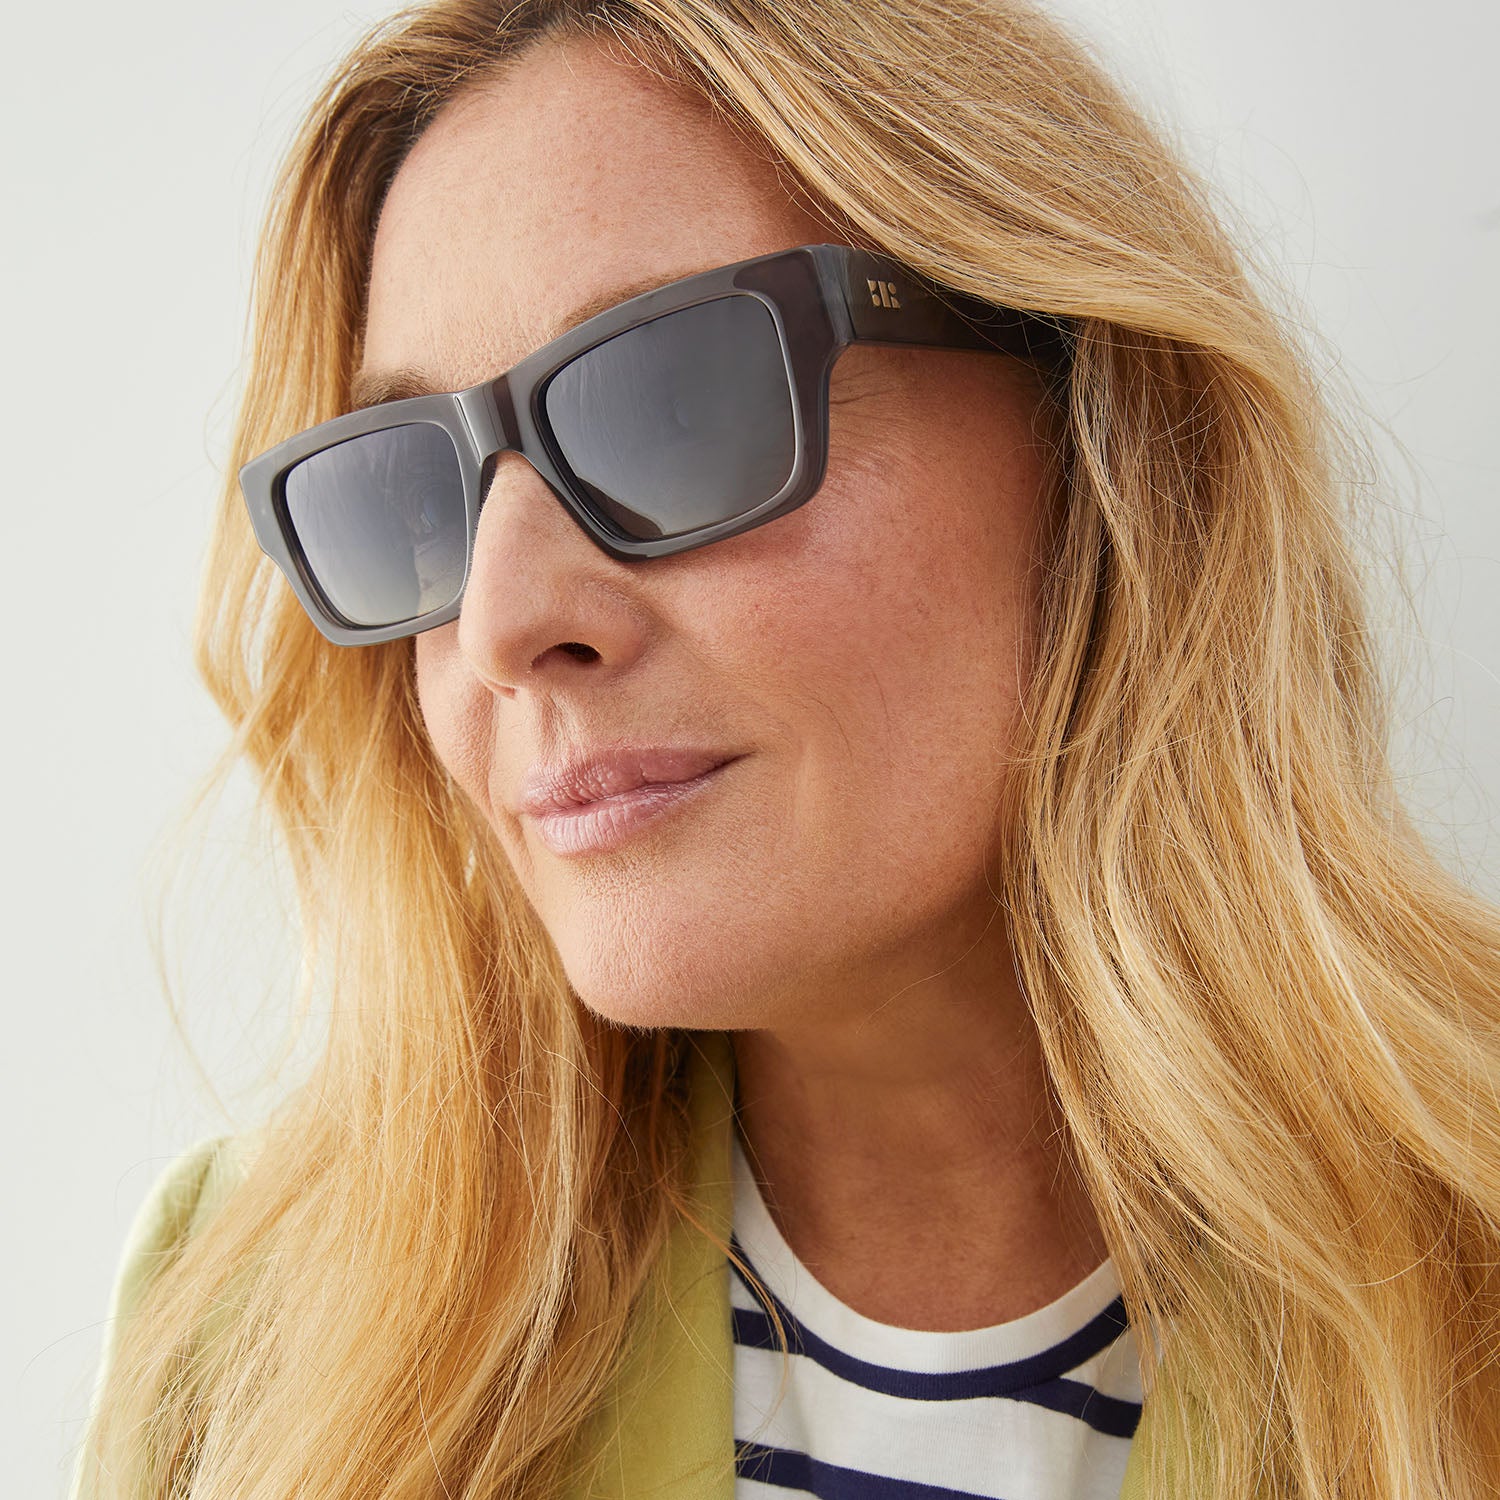 Photo of a man or woman wearing Aimé Sun Grey Sun Glasses by French Kiwis